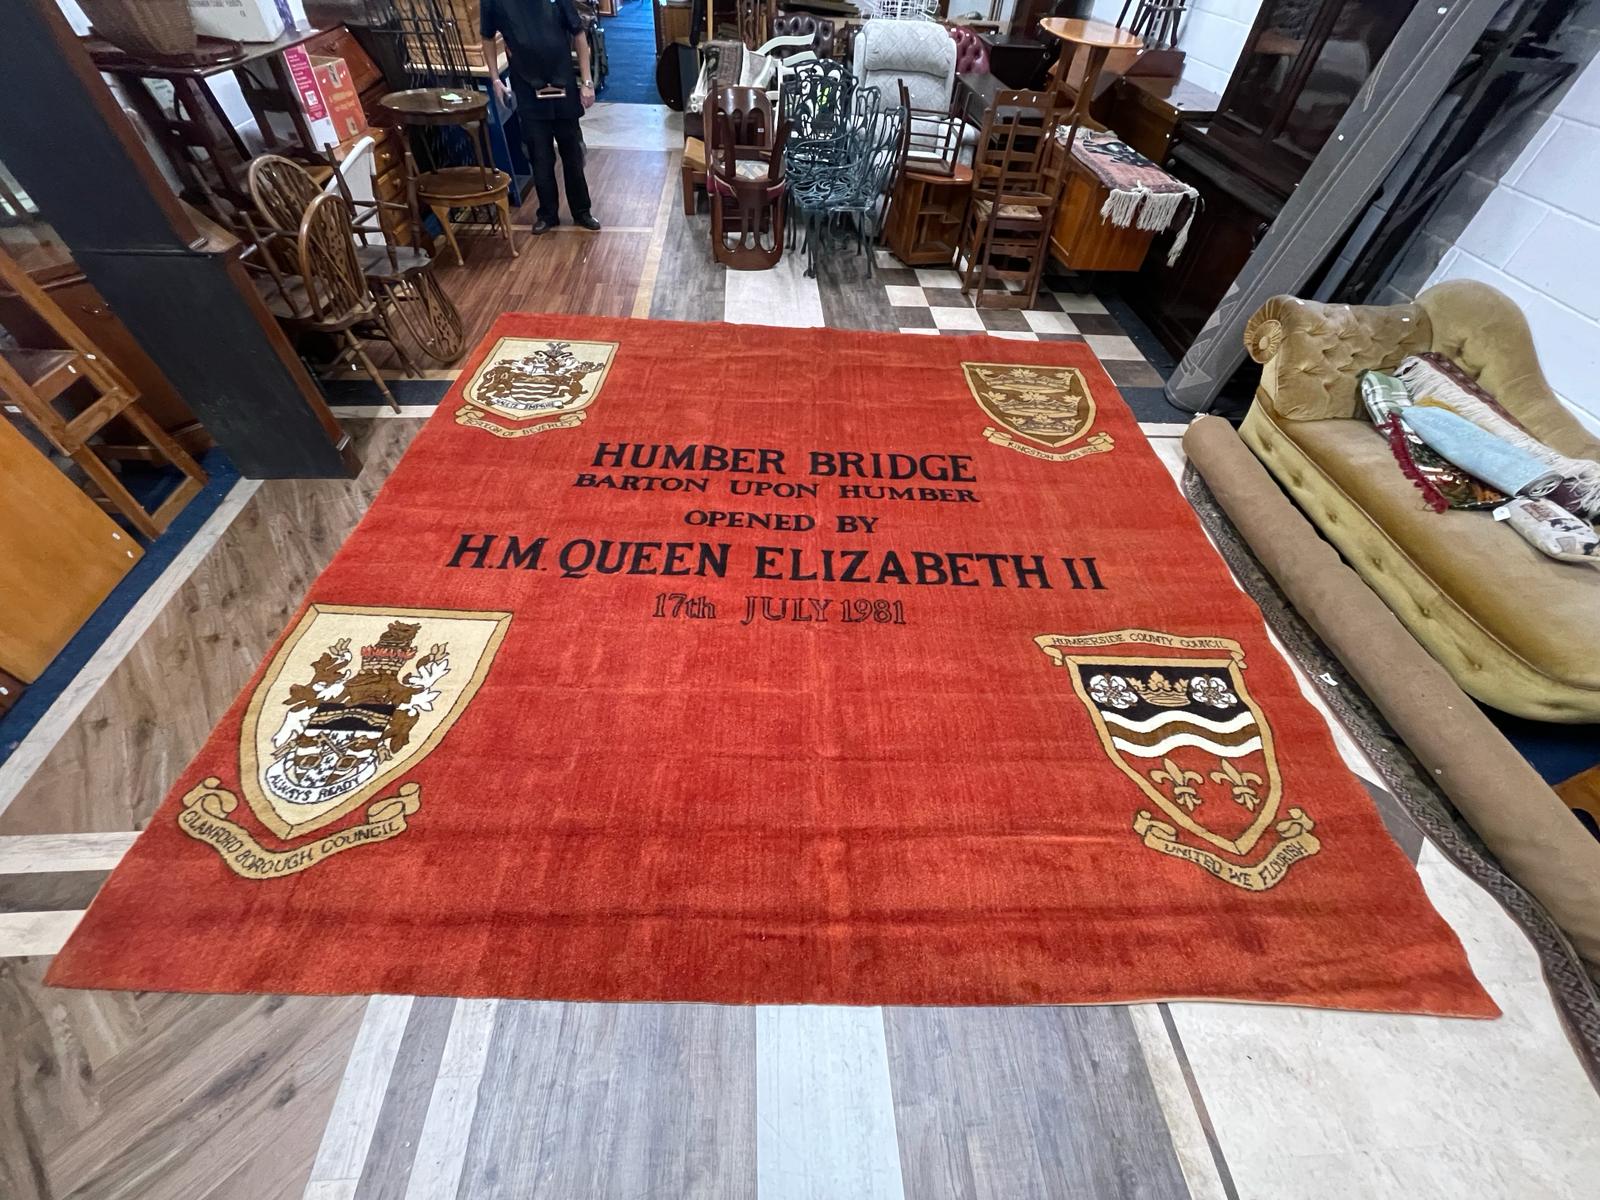 Large ceremonial carpet used by Her Majesty the Queen on the opening of the Humber Bridge.